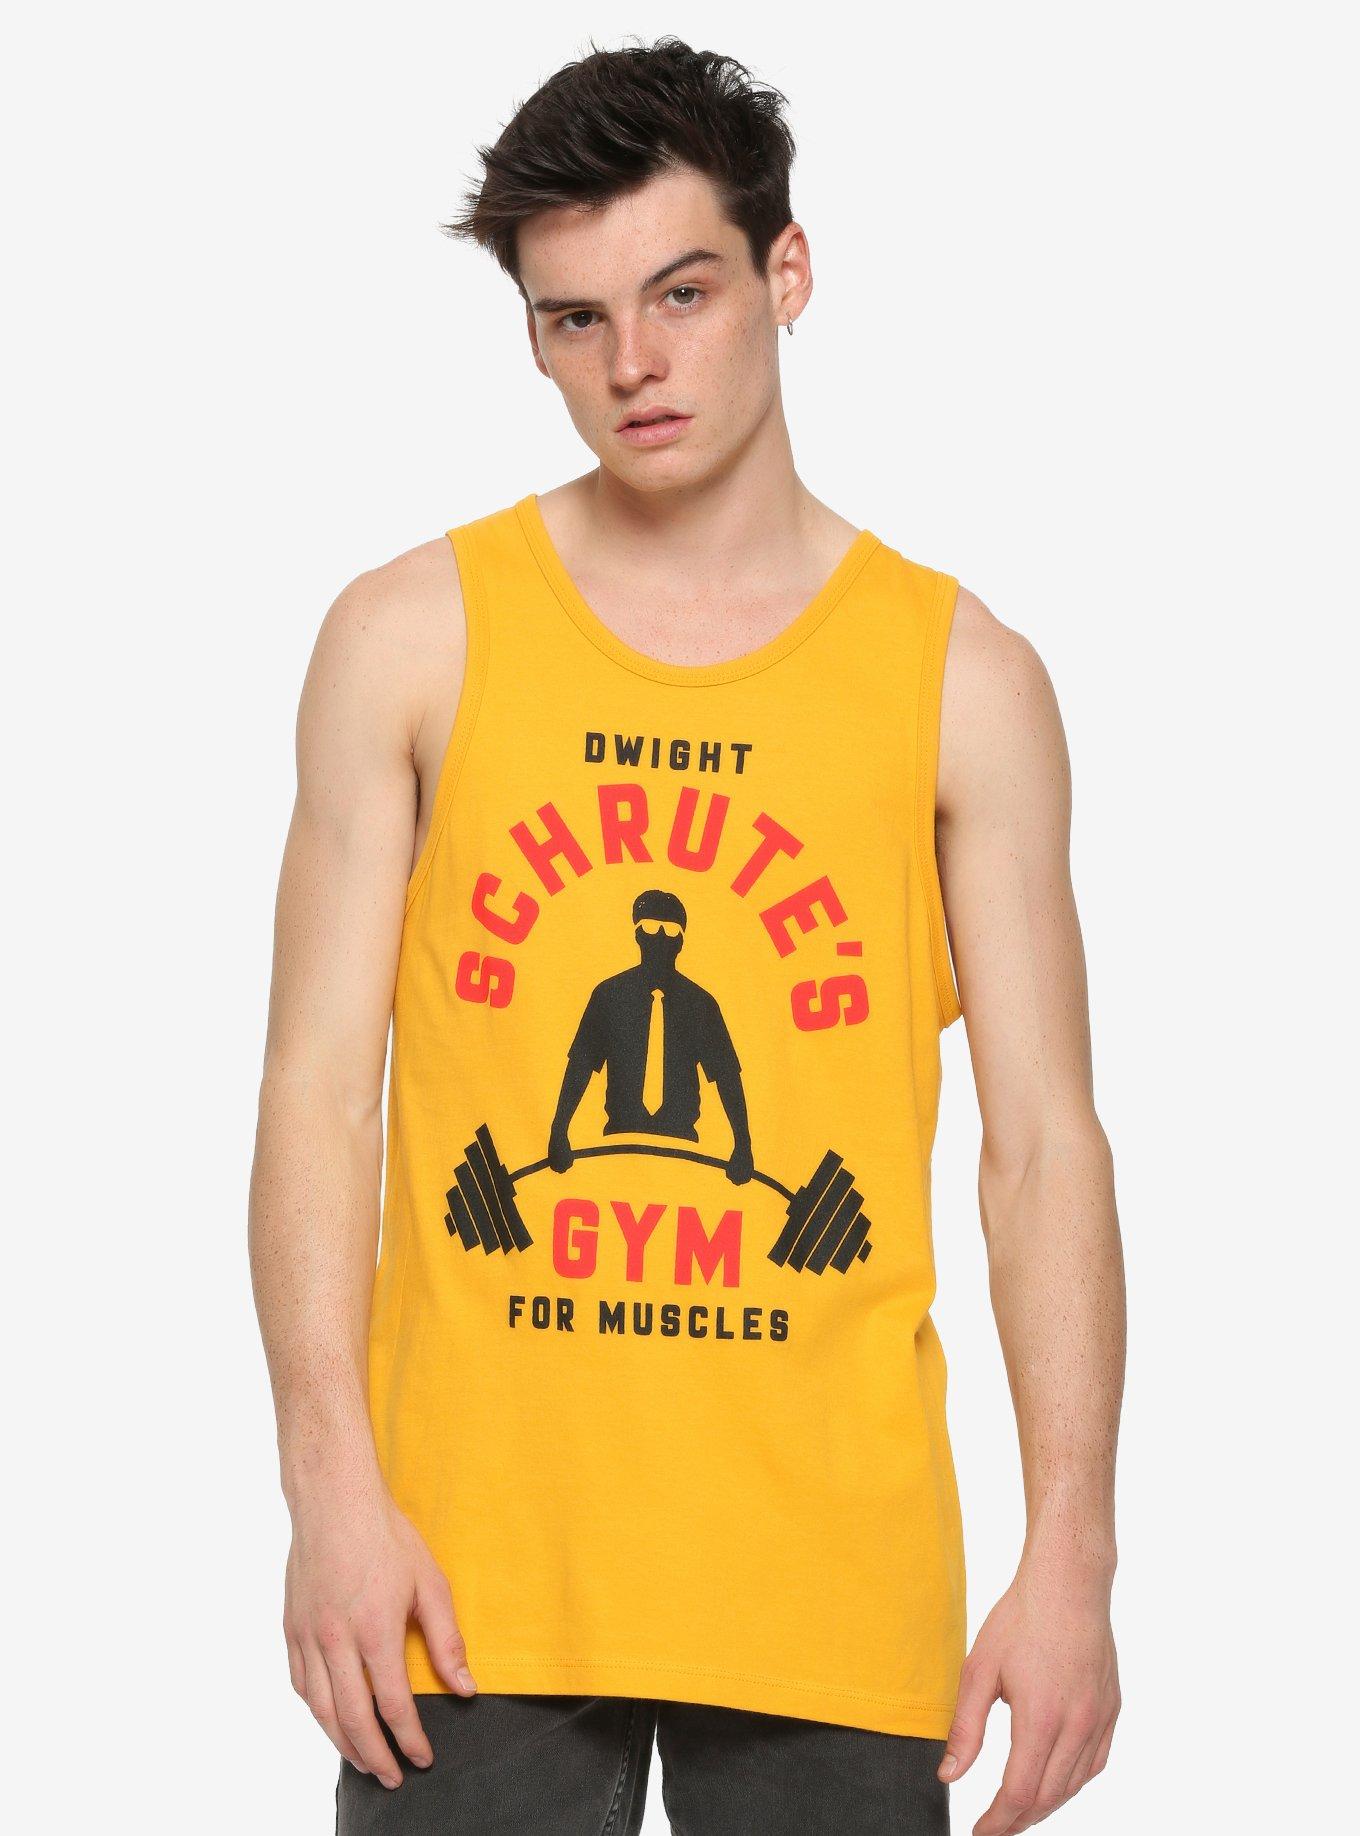 The Office Dwight Schrute's Gym For Muscles Muscle Tank Top, BLACK, hi-res